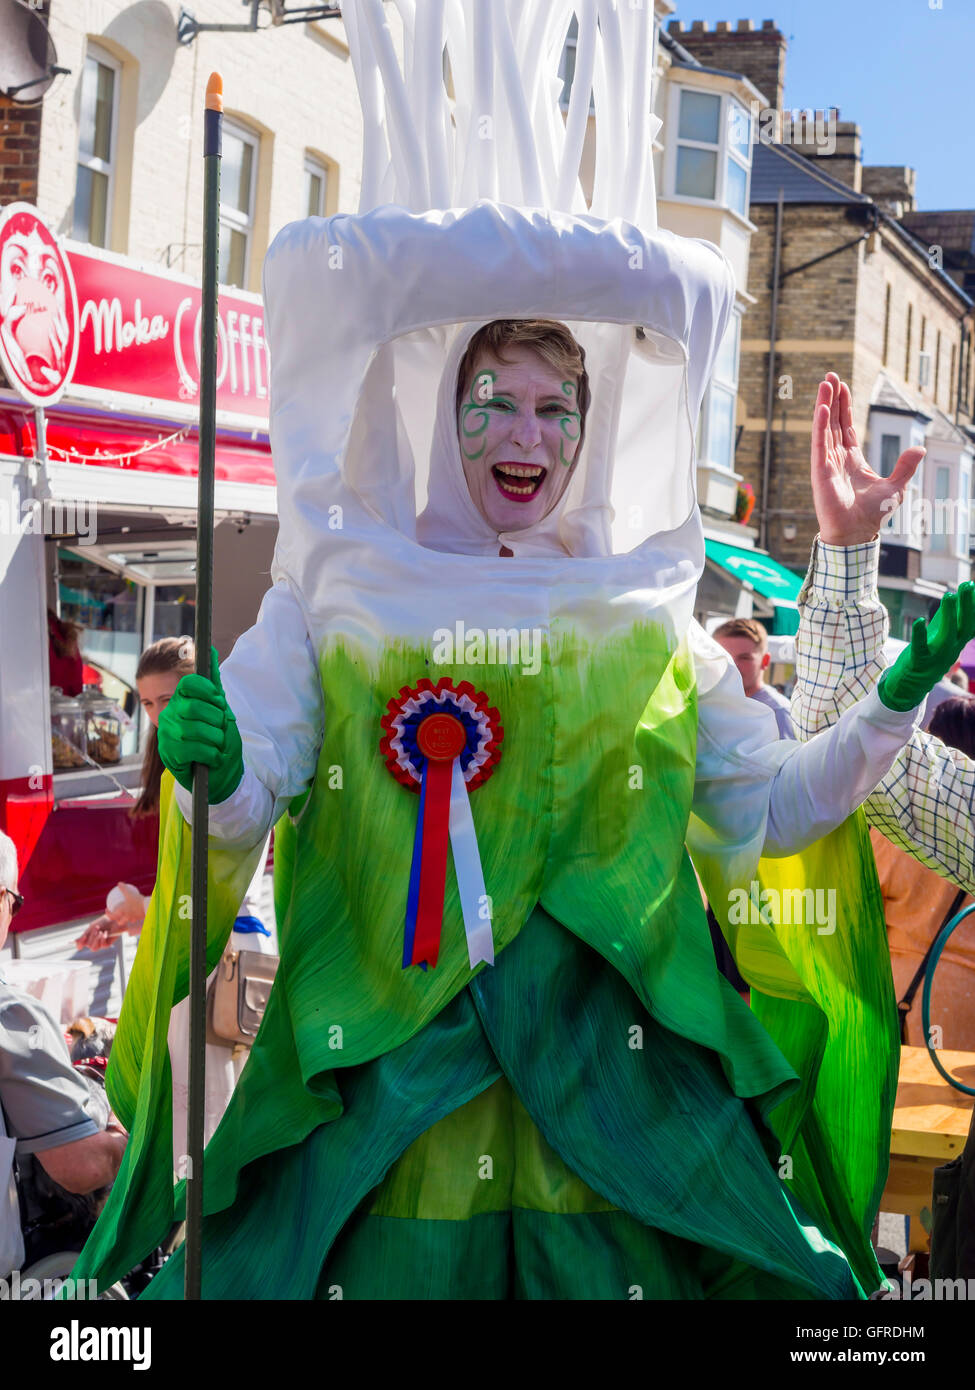 At the Annual Saltburn Food Festival a woman on stilts dressed as a leek to promote locally grown Yorkshire Food Stock Photo